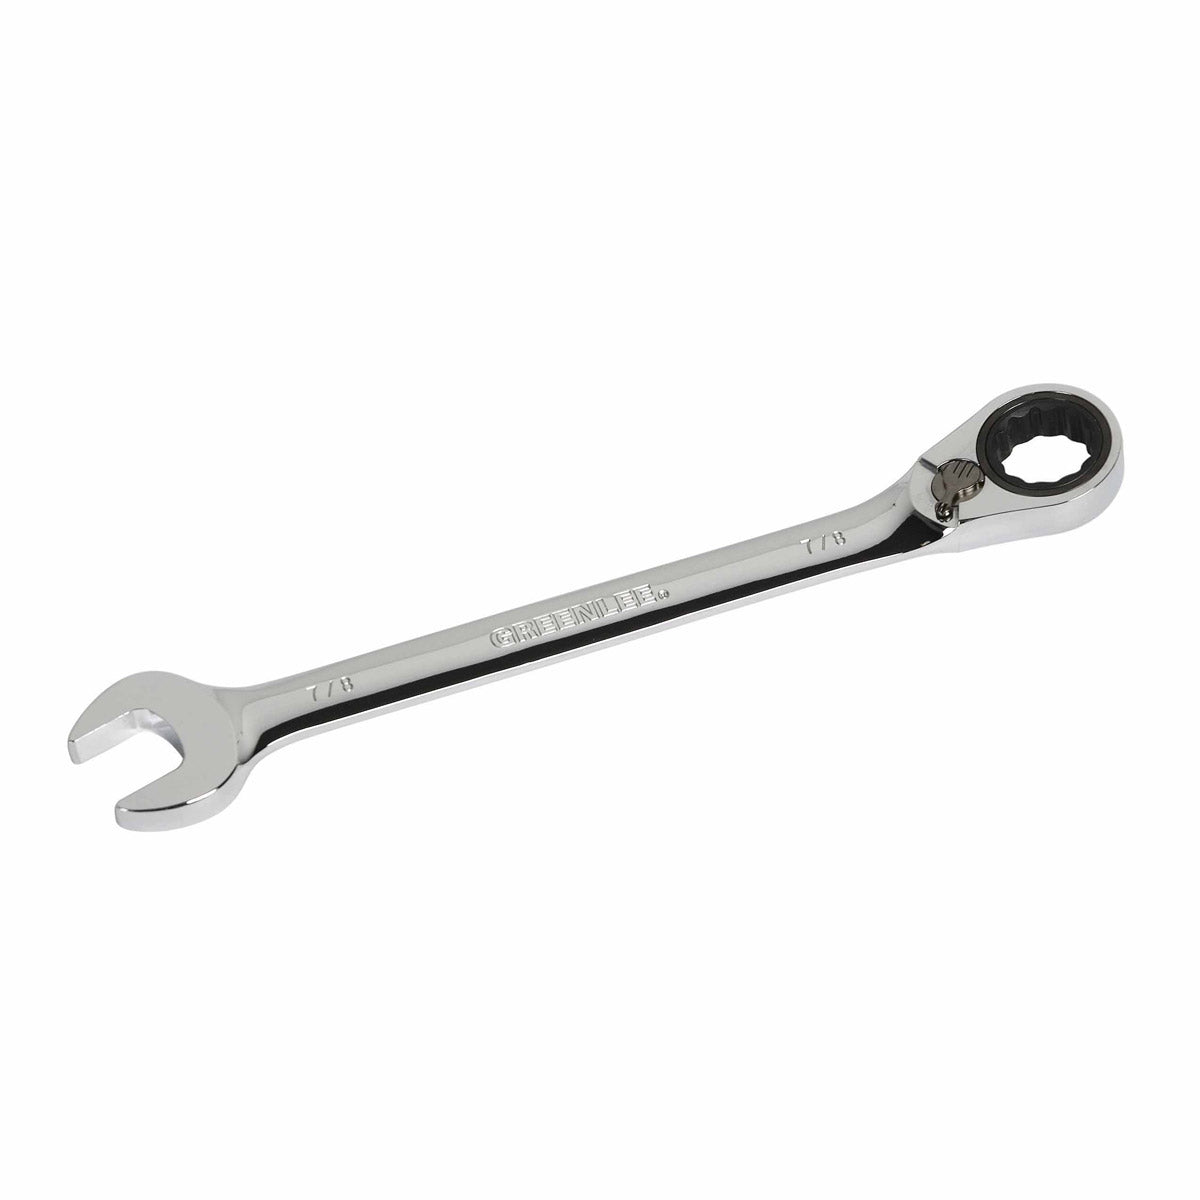 Greenlee 0354-21 WRENCH,COMBO RATCHET 7/8"